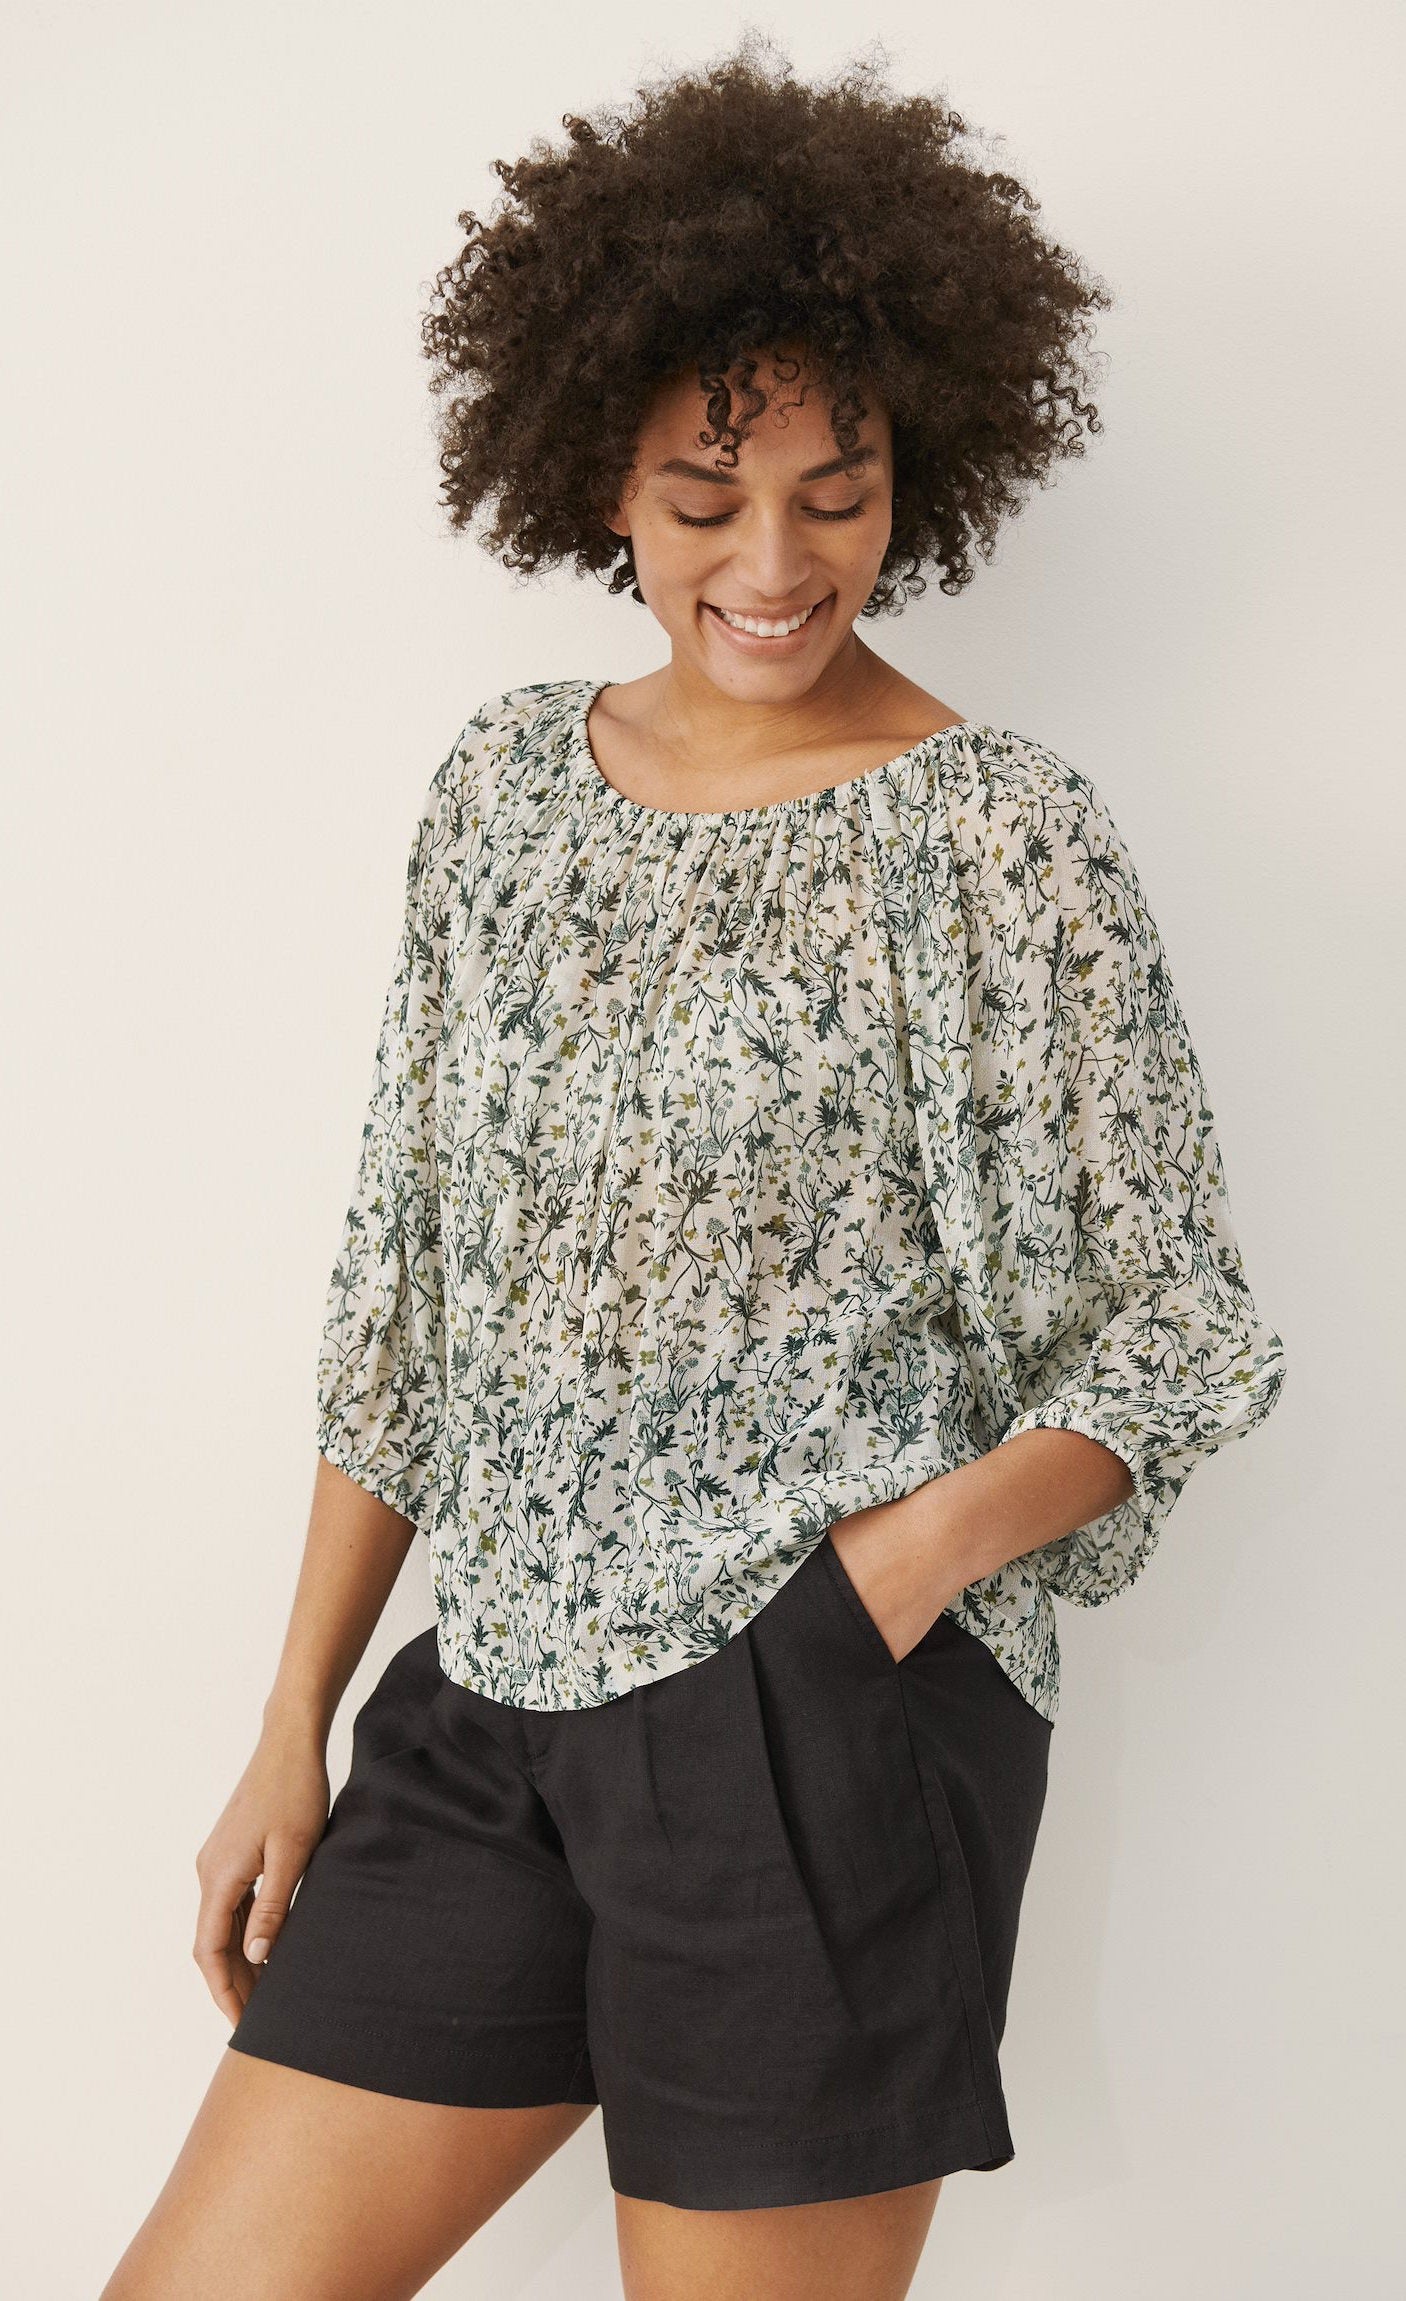 Front top half view of a woman wearing black shorts and the part two ingeborg floral top. This top has a small blue/green floral print, a gathered round neck, and 3/4 length wide sleeves.